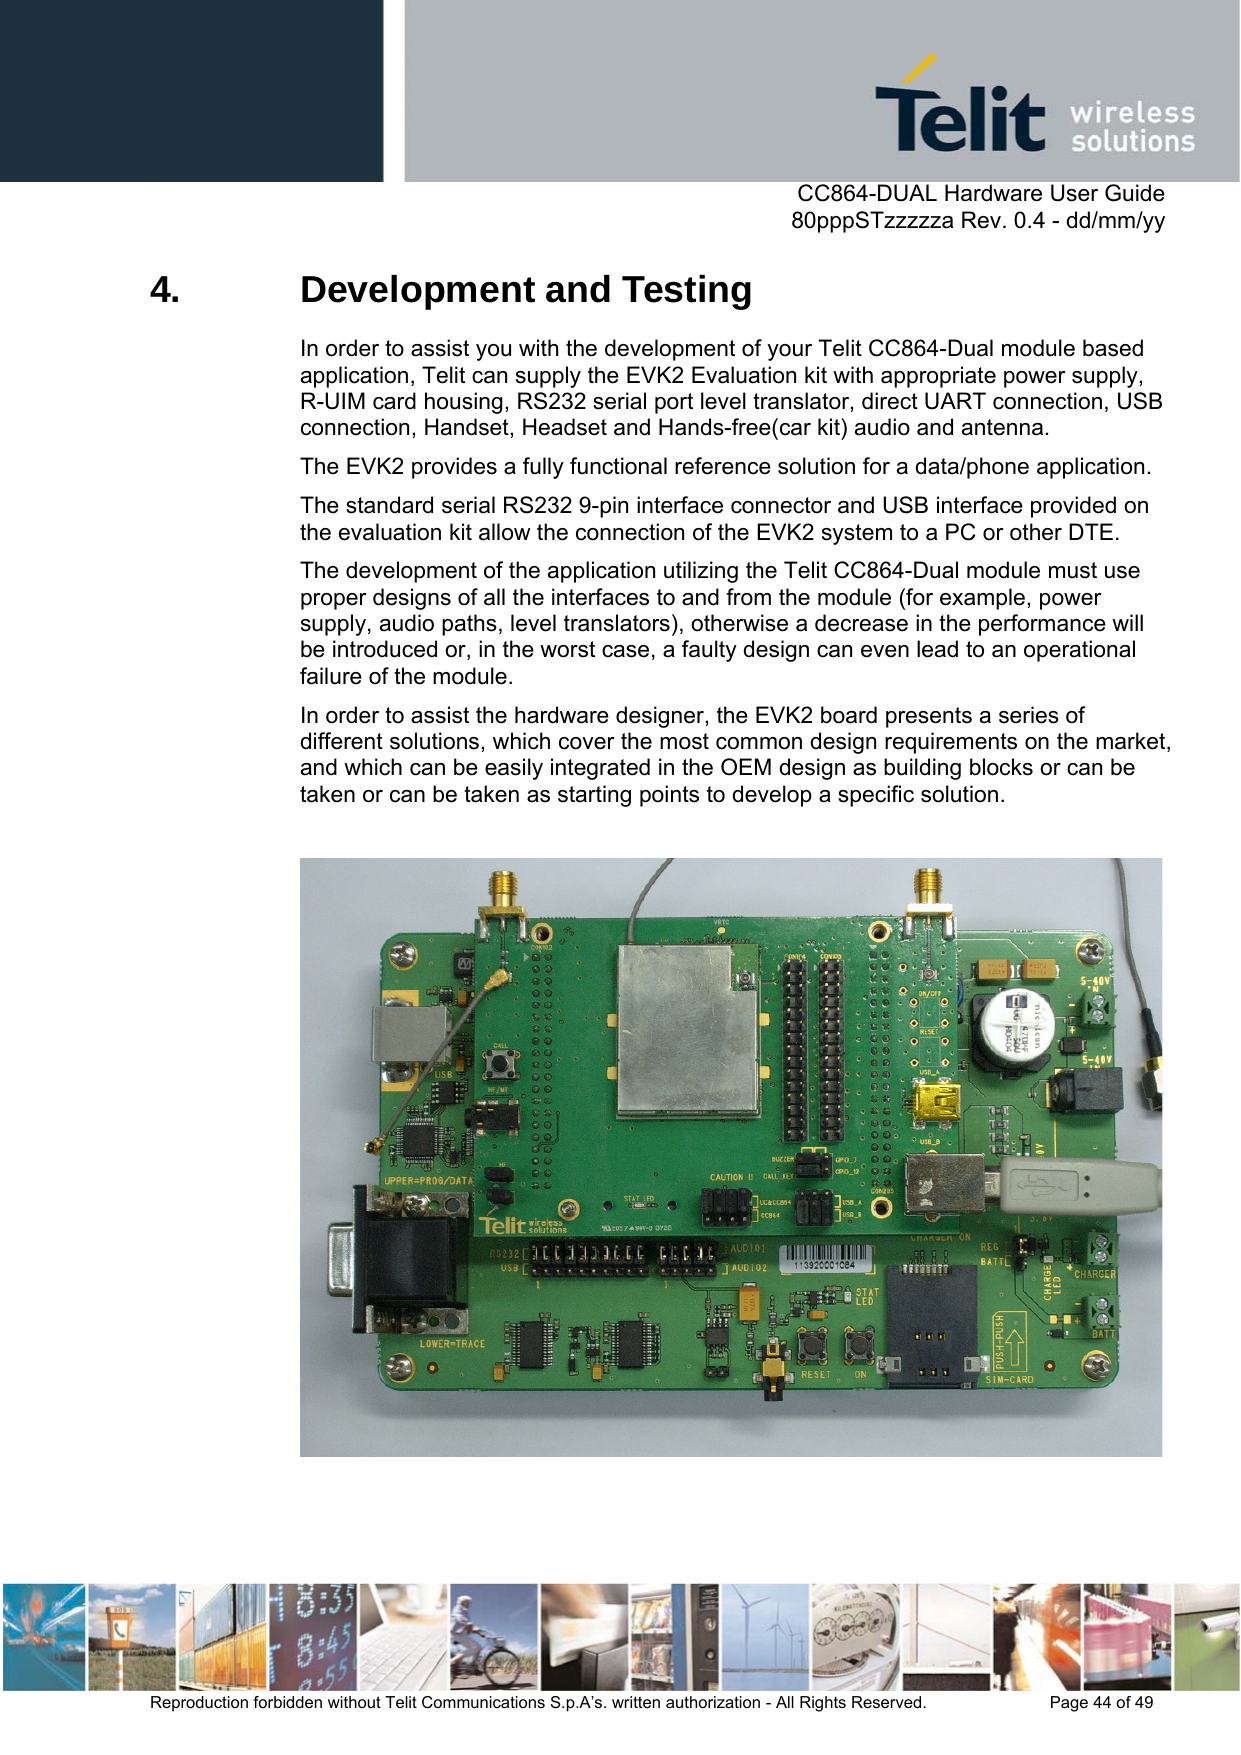      CC864-DUAL Hardware User Guide   80pppSTzzzzza Rev. 0.4 - dd/mm/yy   Reproduction forbidden without Telit Communications S.p.A’s. written authorization - All Rights Reserved.    Page 44 of 49  4.  Development and Testing In order to assist you with the development of your Telit CC864-Dual module based application, Telit can supply the EVK2 Evaluation kit with appropriate power supply, R-UIM card housing, RS232 serial port level translator, direct UART connection, USB connection, Handset, Headset and Hands-free(car kit) audio and antenna.  The EVK2 provides a fully functional reference solution for a data/phone application. The standard serial RS232 9-pin interface connector and USB interface provided on the evaluation kit allow the connection of the EVK2 system to a PC or other DTE. The development of the application utilizing the Telit CC864-Dual module must use proper designs of all the interfaces to and from the module (for example, power supply, audio paths, level translators), otherwise a decrease in the performance will be introduced or, in the worst case, a faulty design can even lead to an operational failure of the module.  In order to assist the hardware designer, the EVK2 board presents a series of different solutions, which cover the most common design requirements on the market, and which can be easily integrated in the OEM design as building blocks or can be taken or can be taken as starting points to develop a specific solution.   